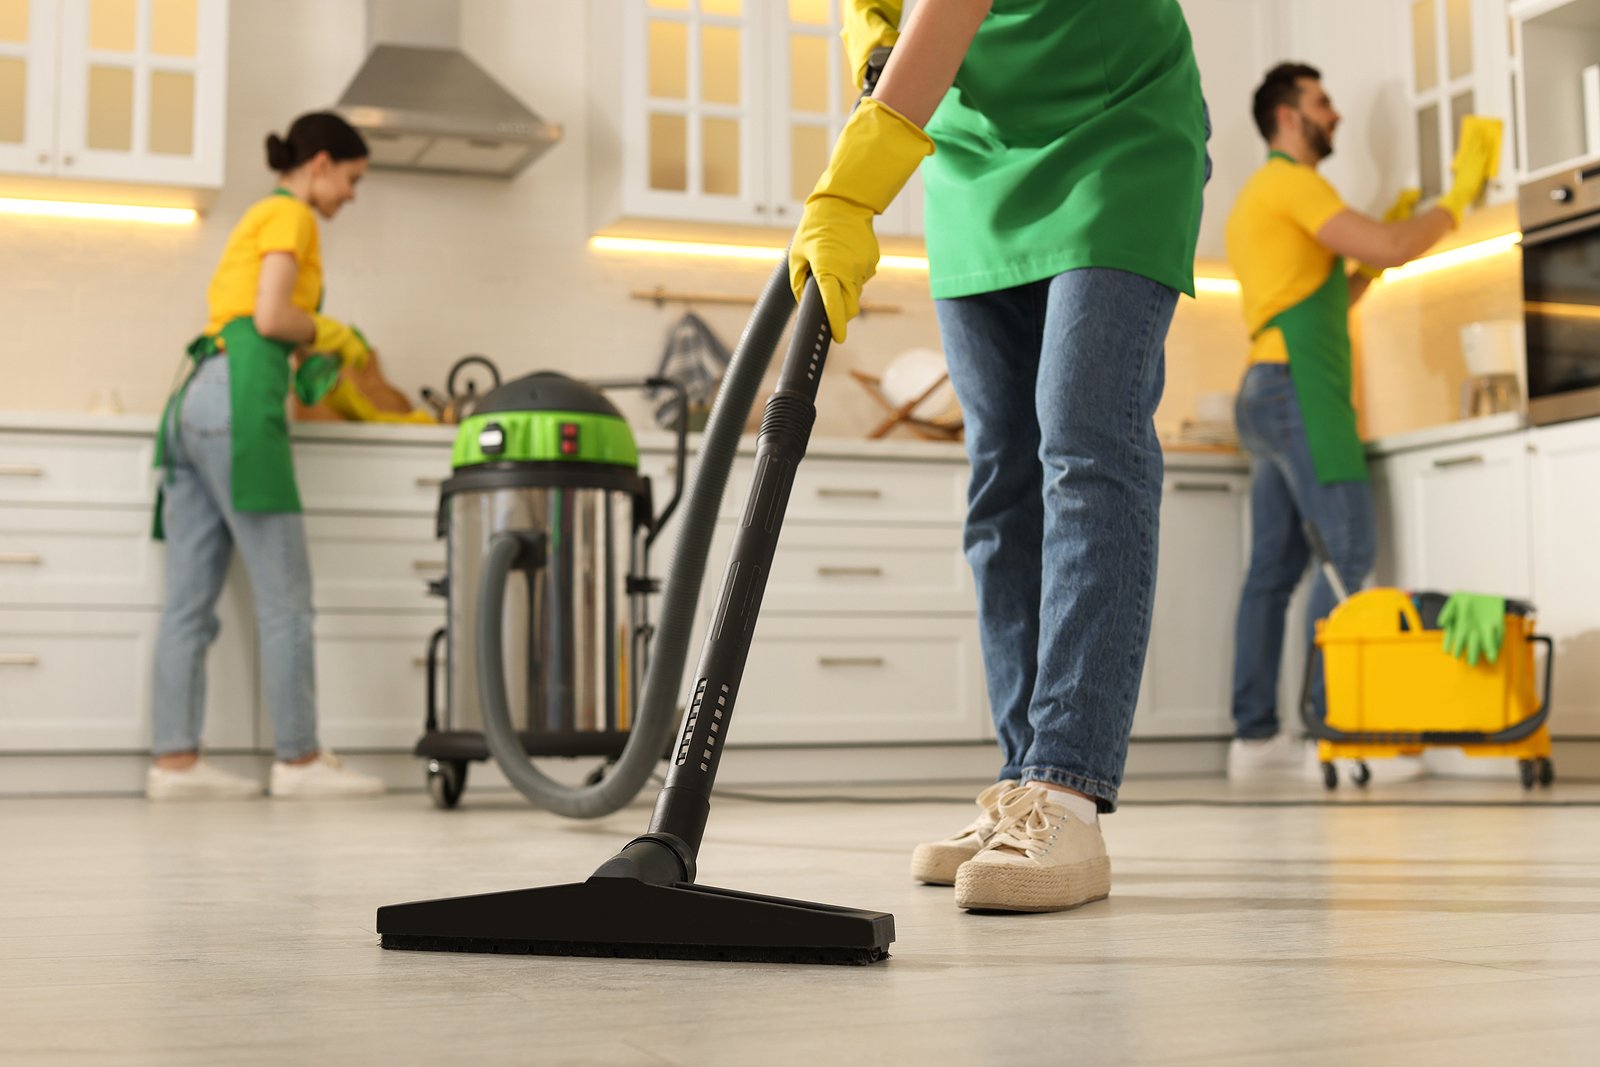 Three employees of a professional cleaning company at work in a kitchen.